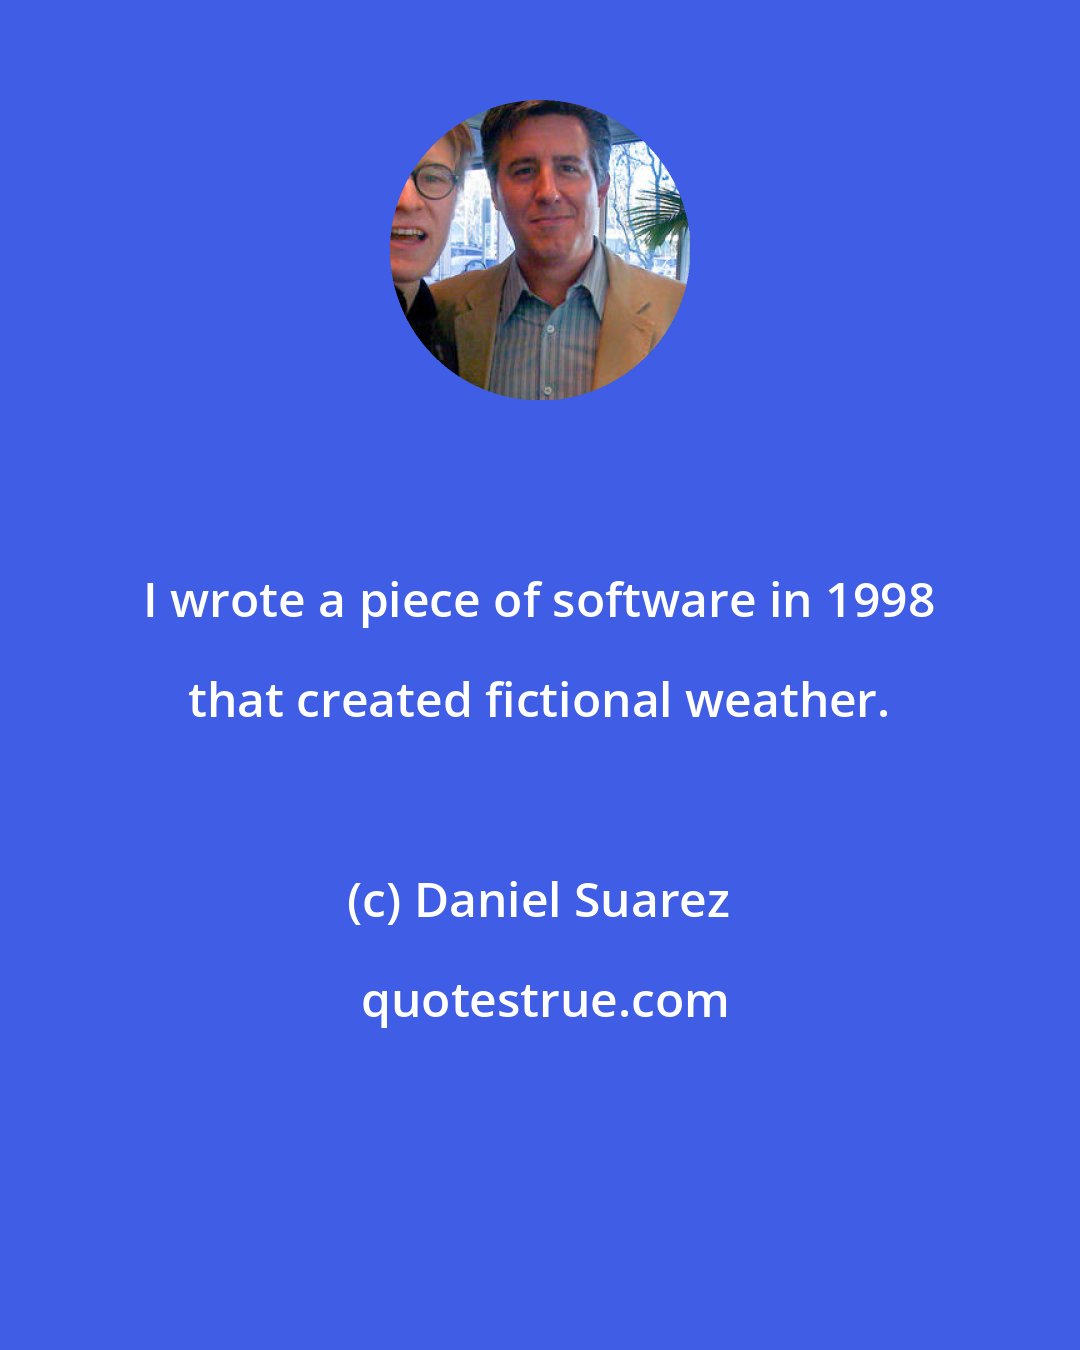 Daniel Suarez: I wrote a piece of software in 1998 that created fictional weather.